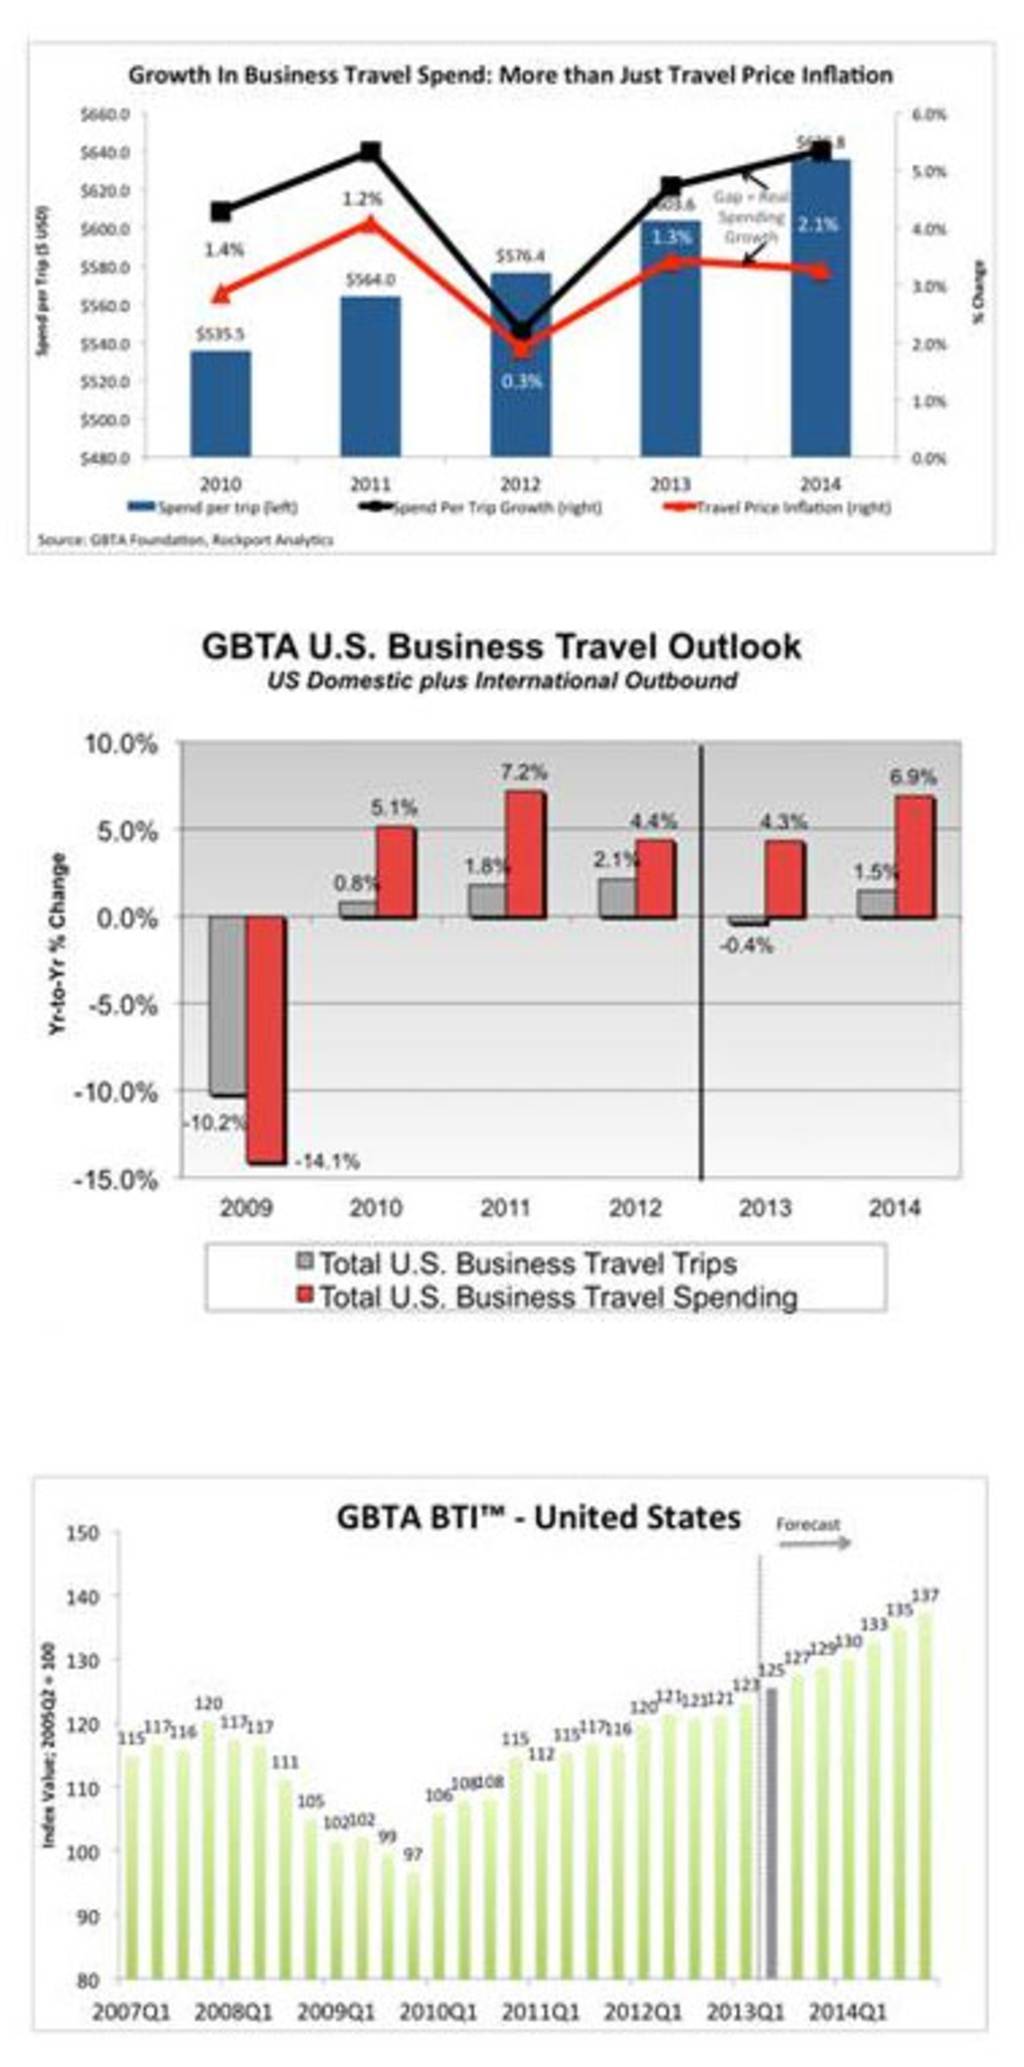 Latest GBTA Report Finds that U.S. Business Travel Should Continue Its Steady Rise